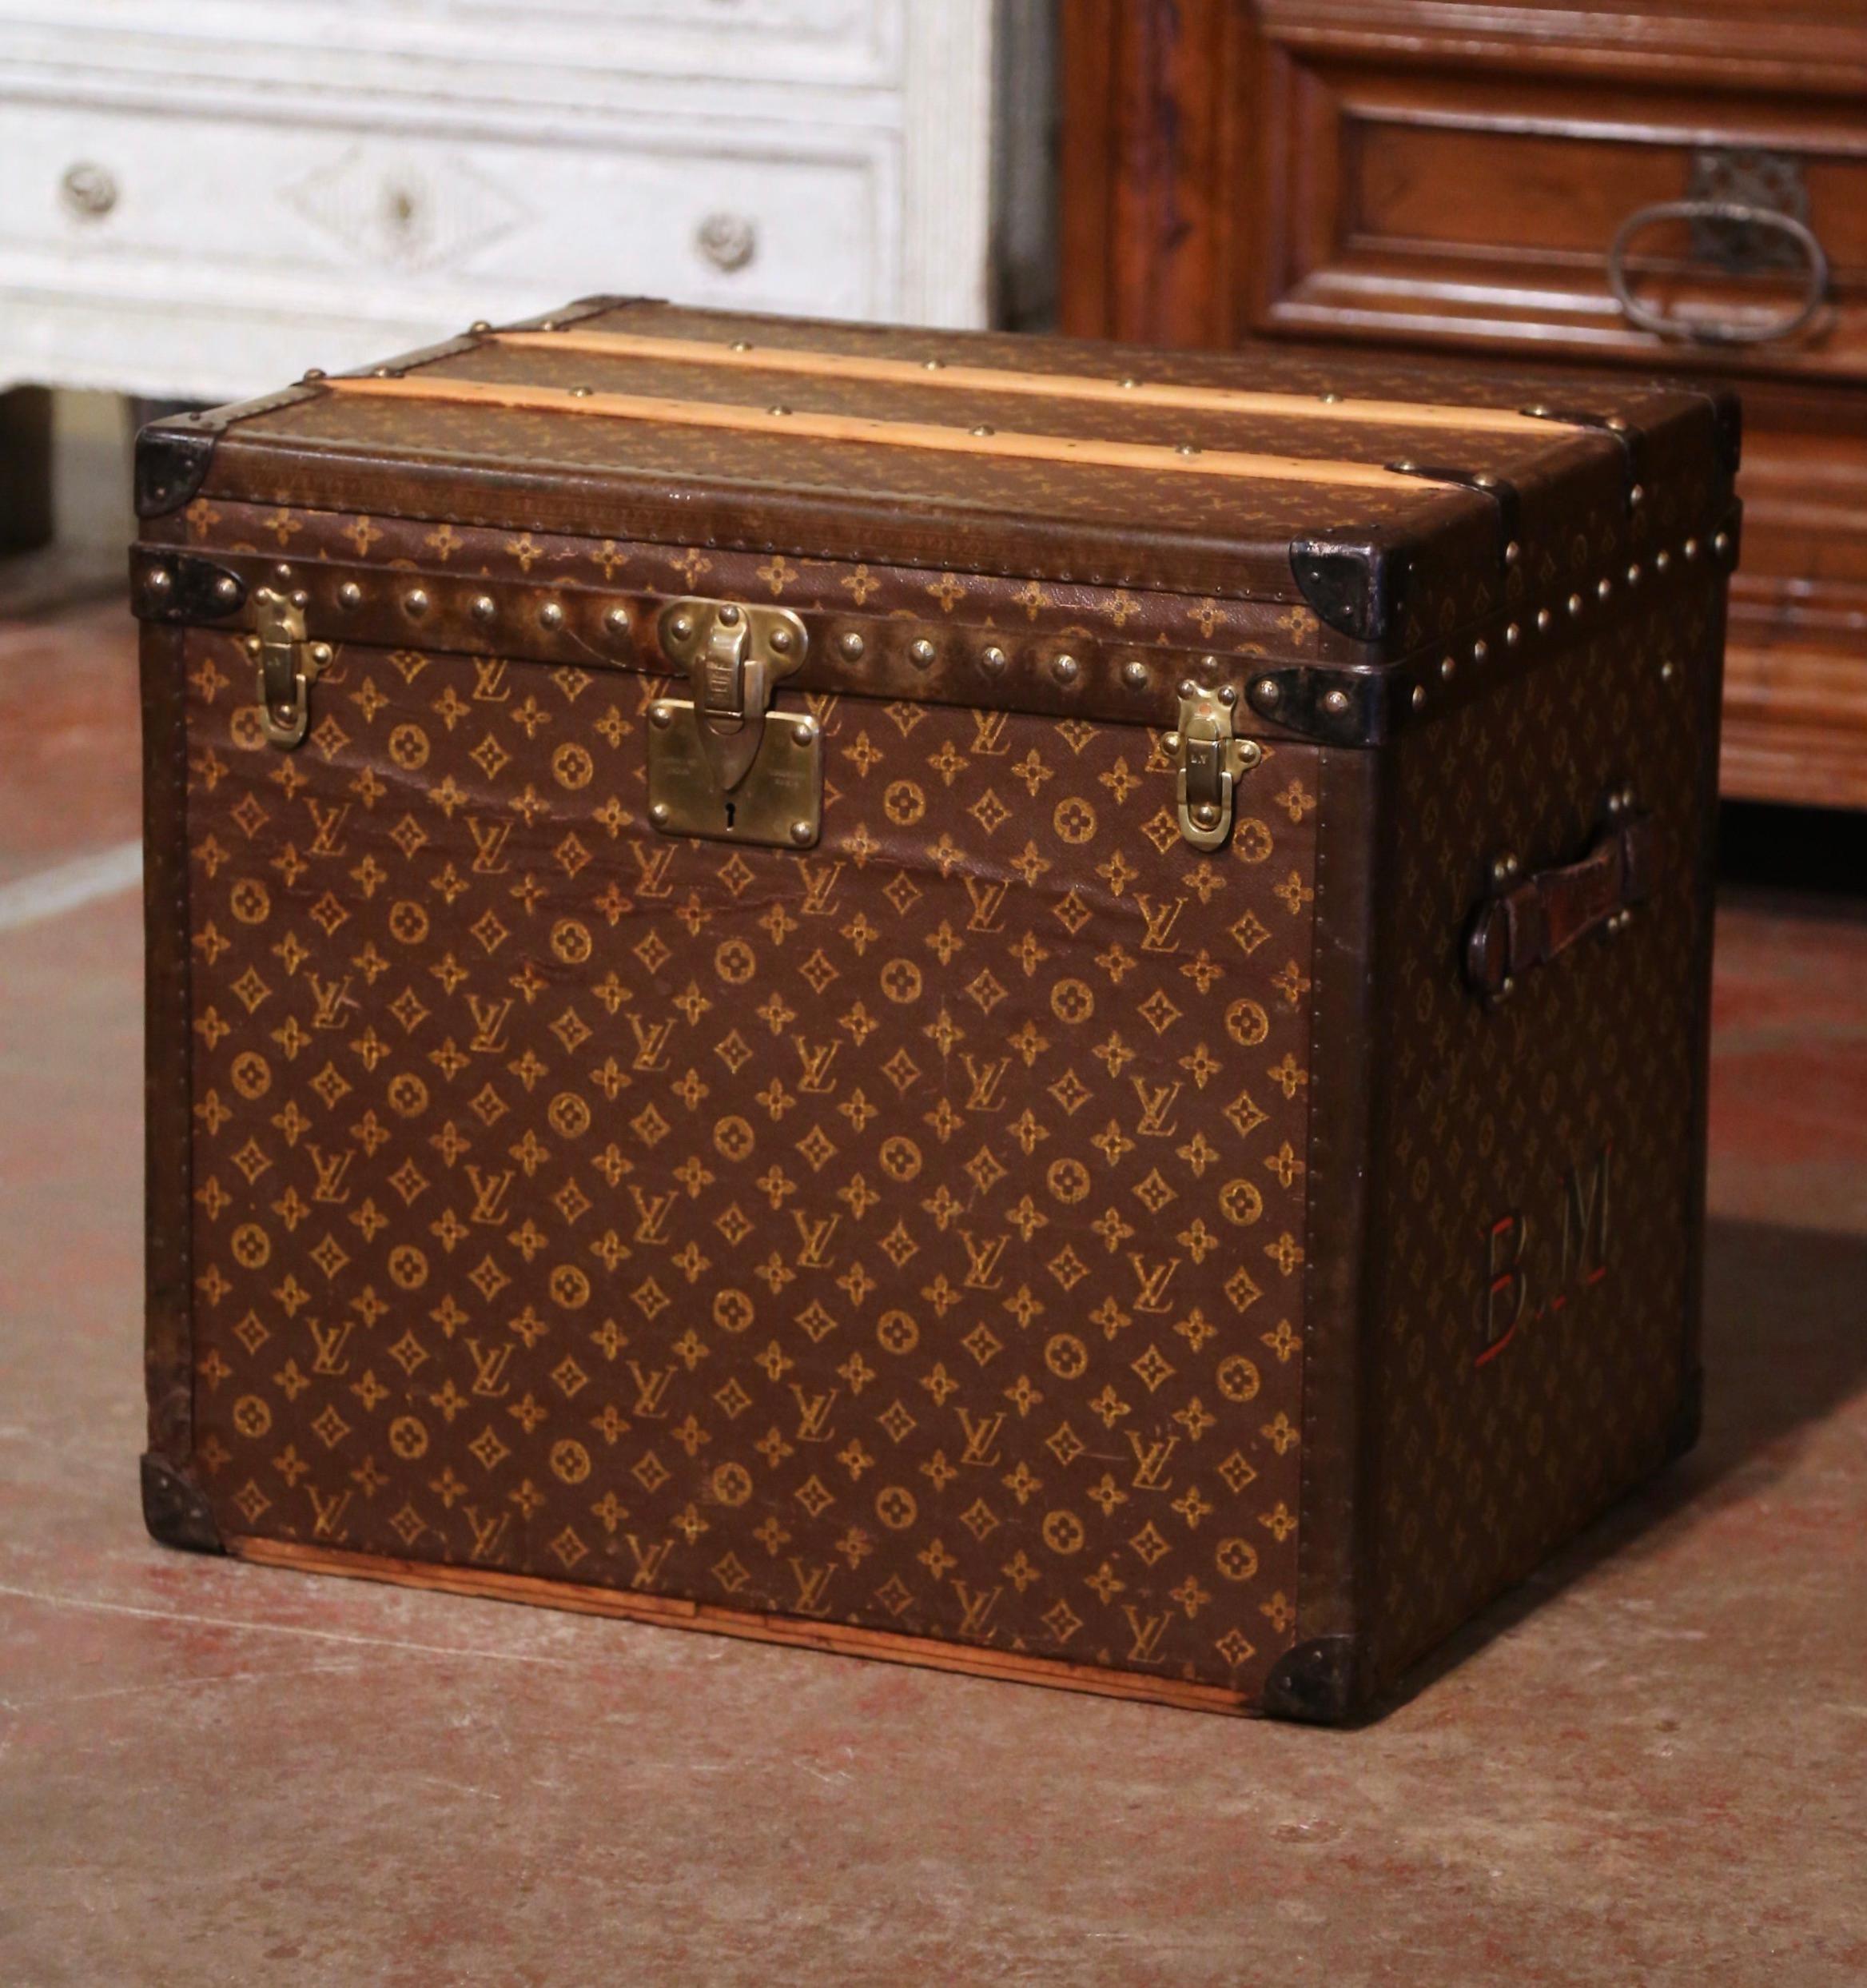 Decorate a den or living room with this antique trunk as a coffee table. Crafted in France by Louis Vuitton circa 1920, the decorative Vuitton hat trunk 